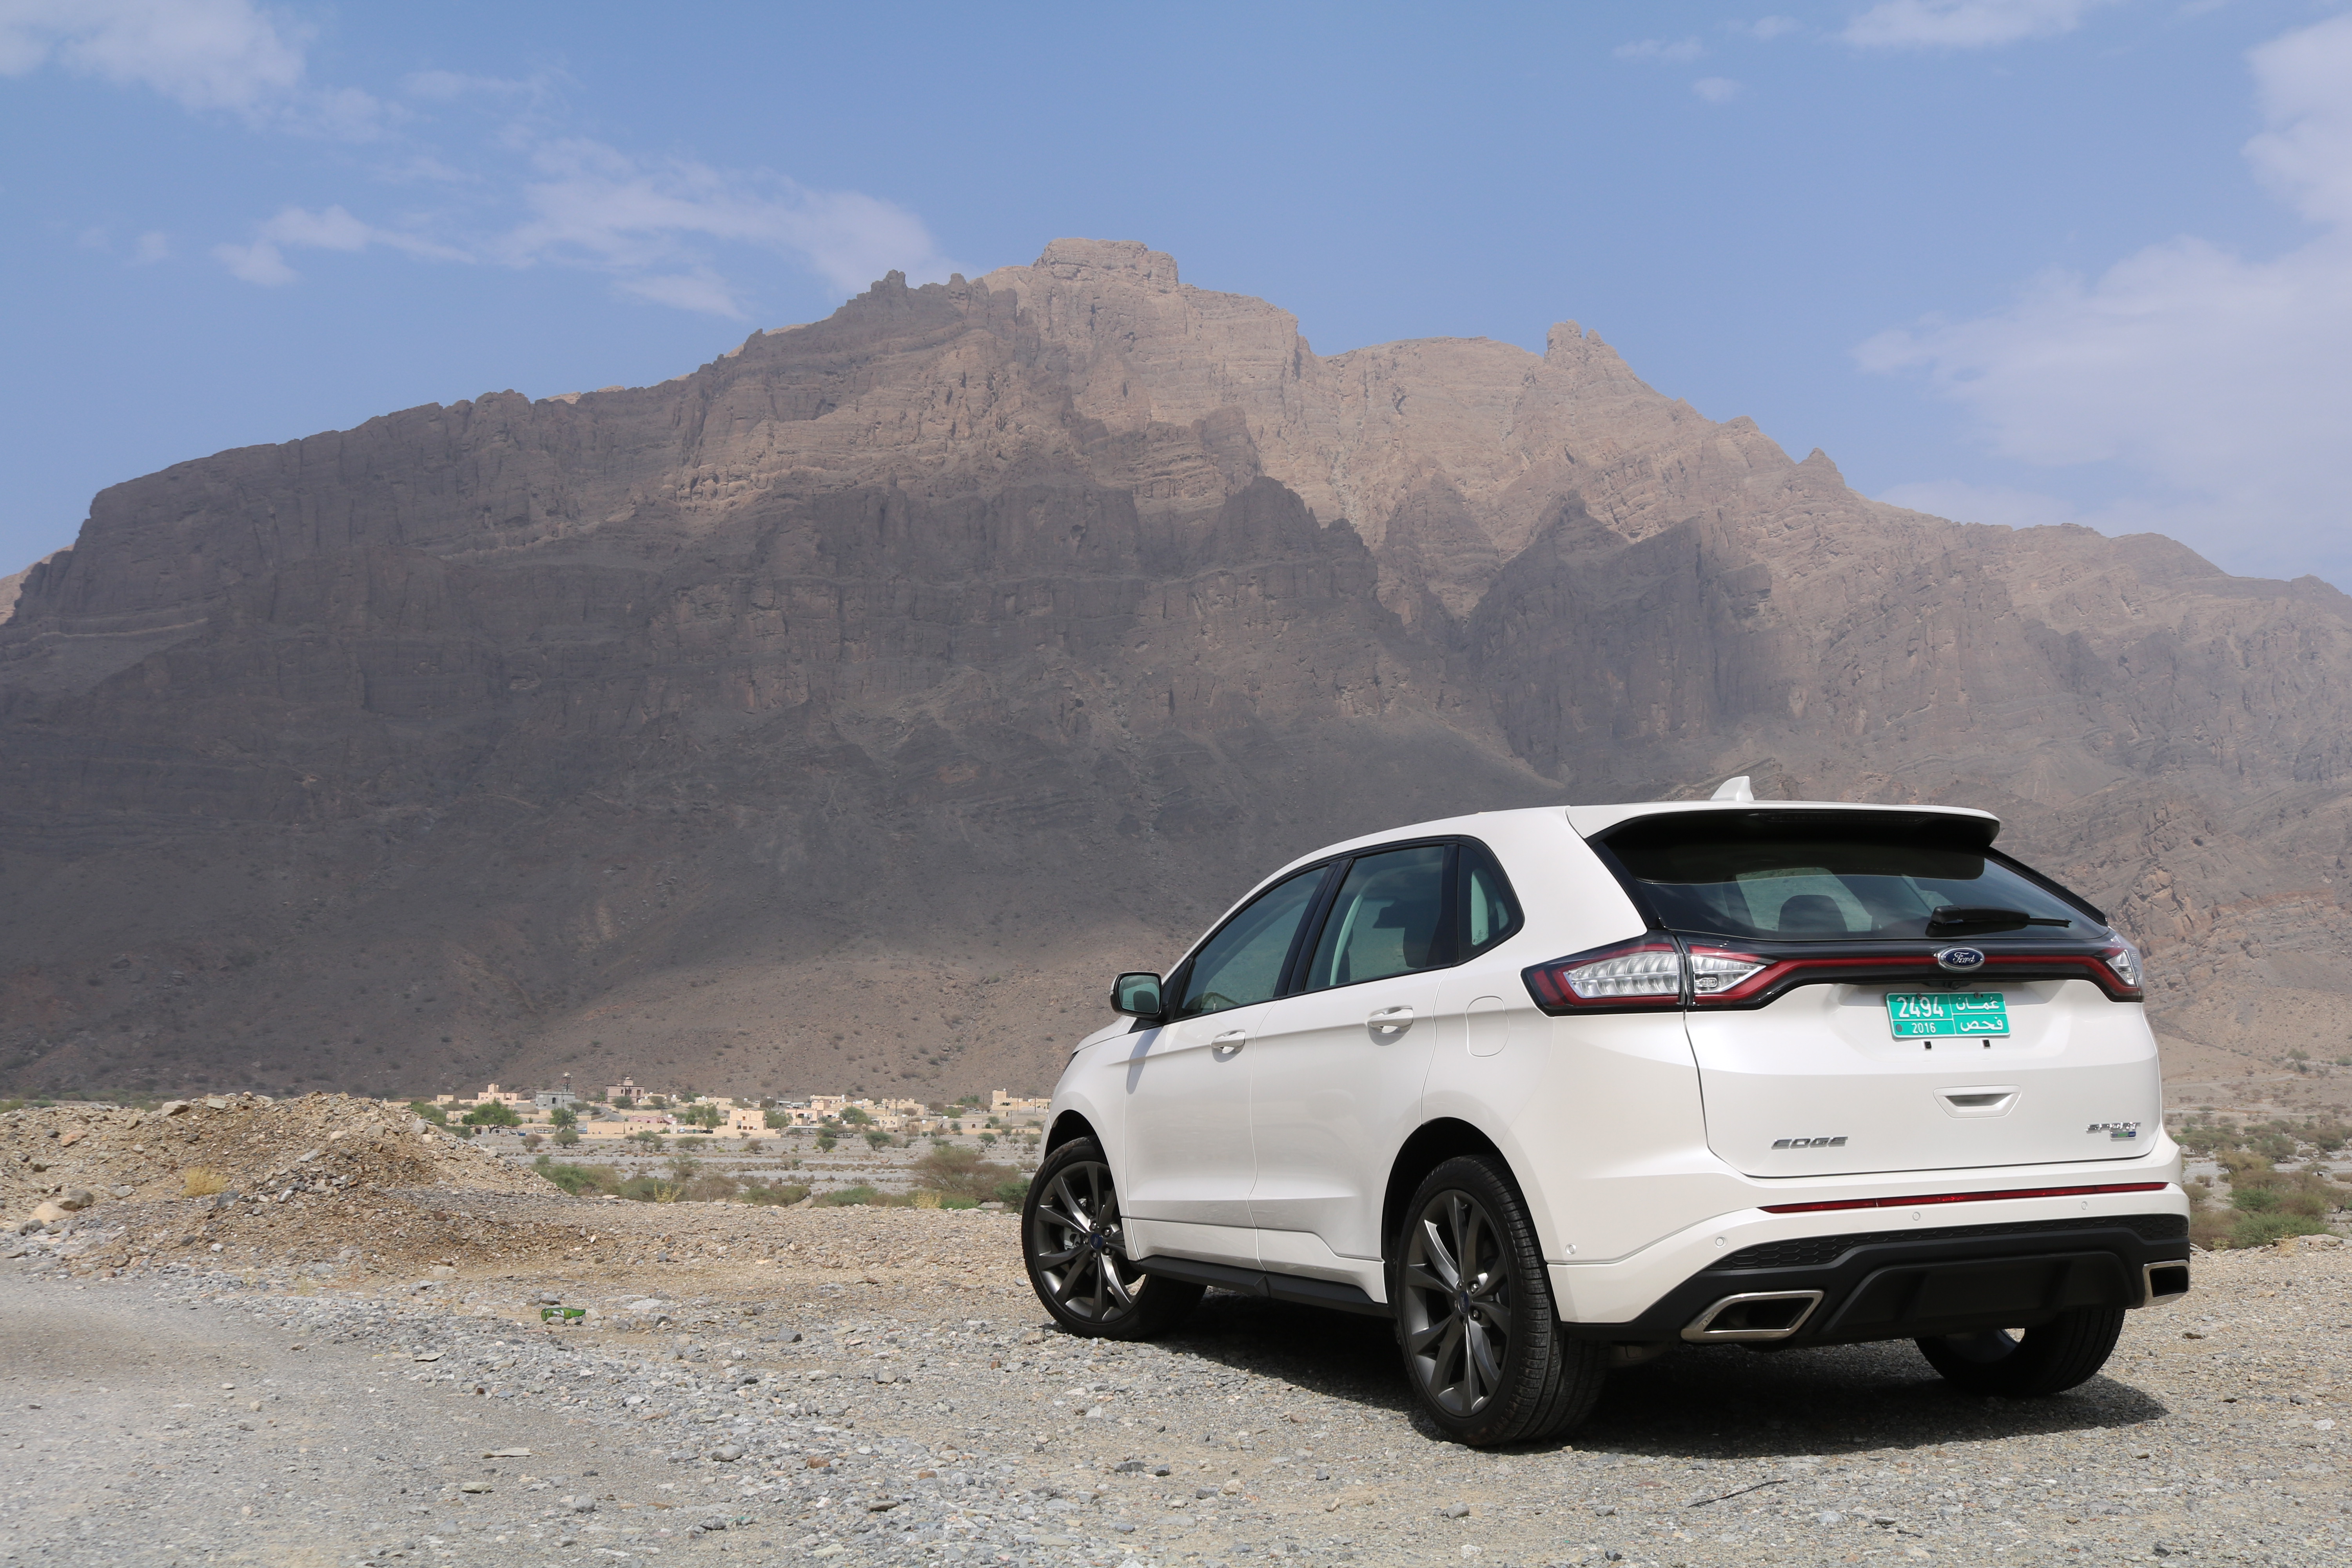 An Oman Road Trip in a Ford Edge to the Wakan Village